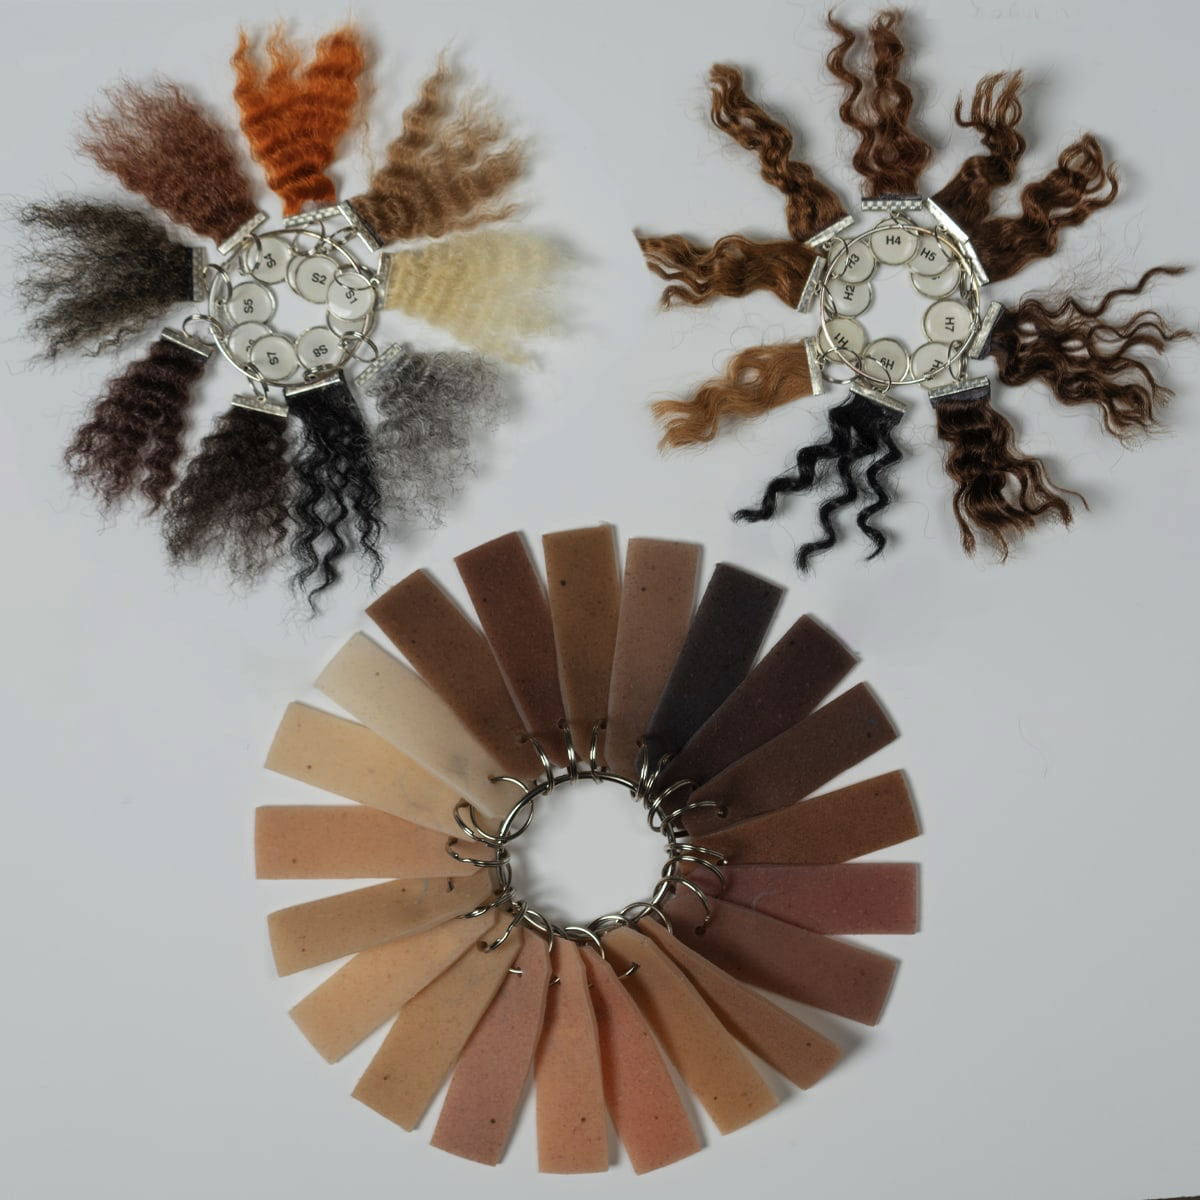 Hair and color samples laid out in circles